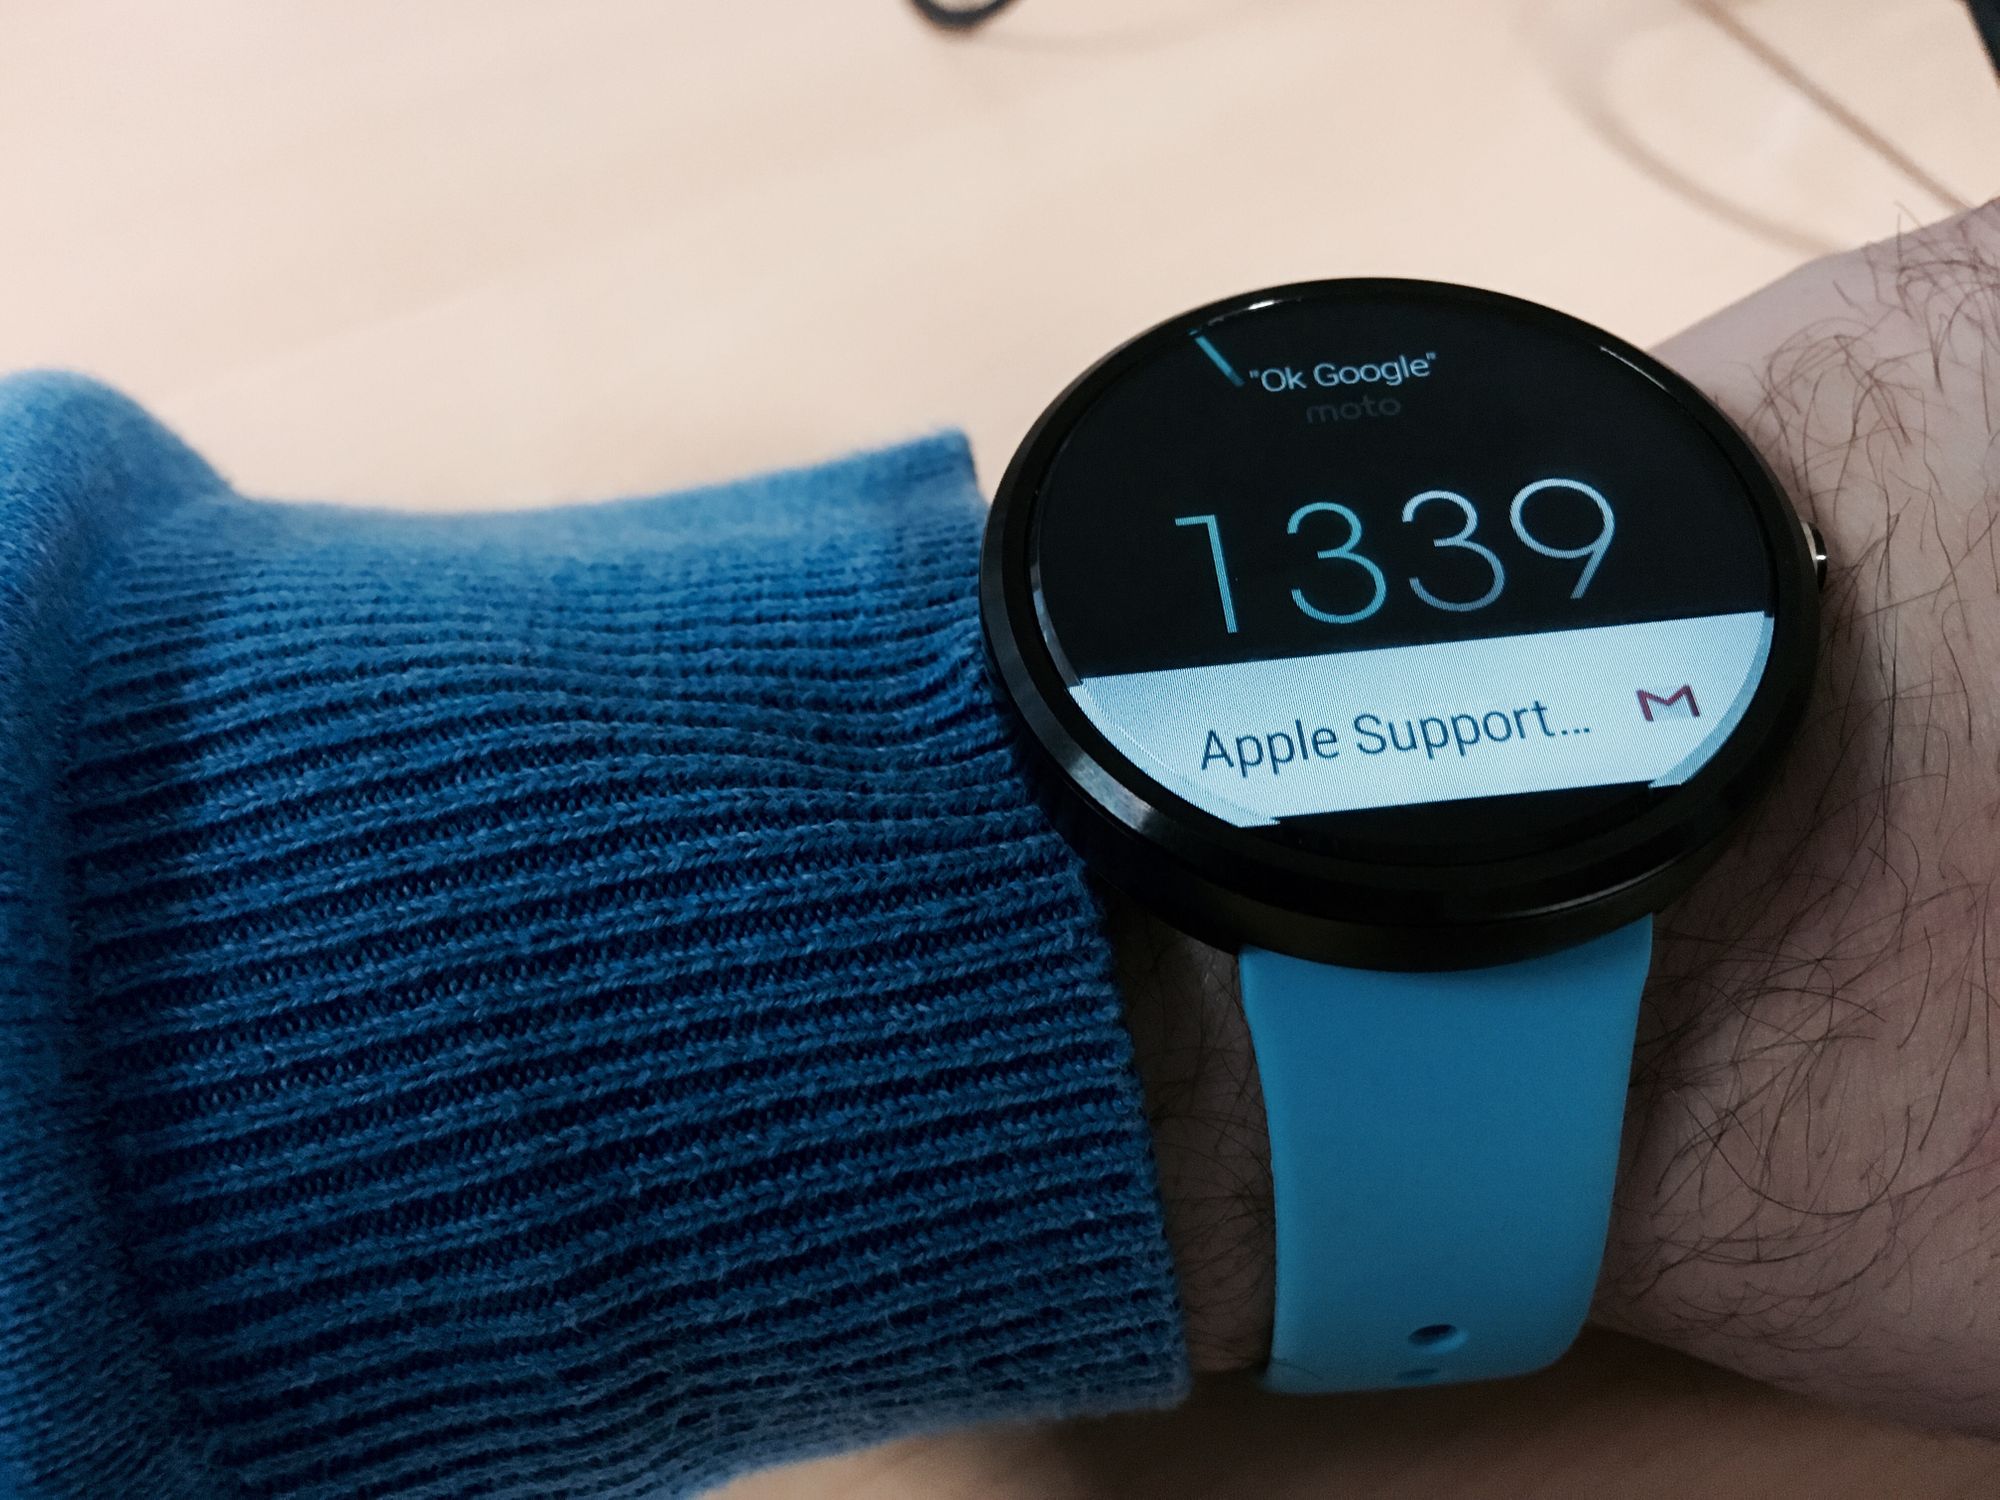 Will an Android Wear watch work with my shiny new iPhone?